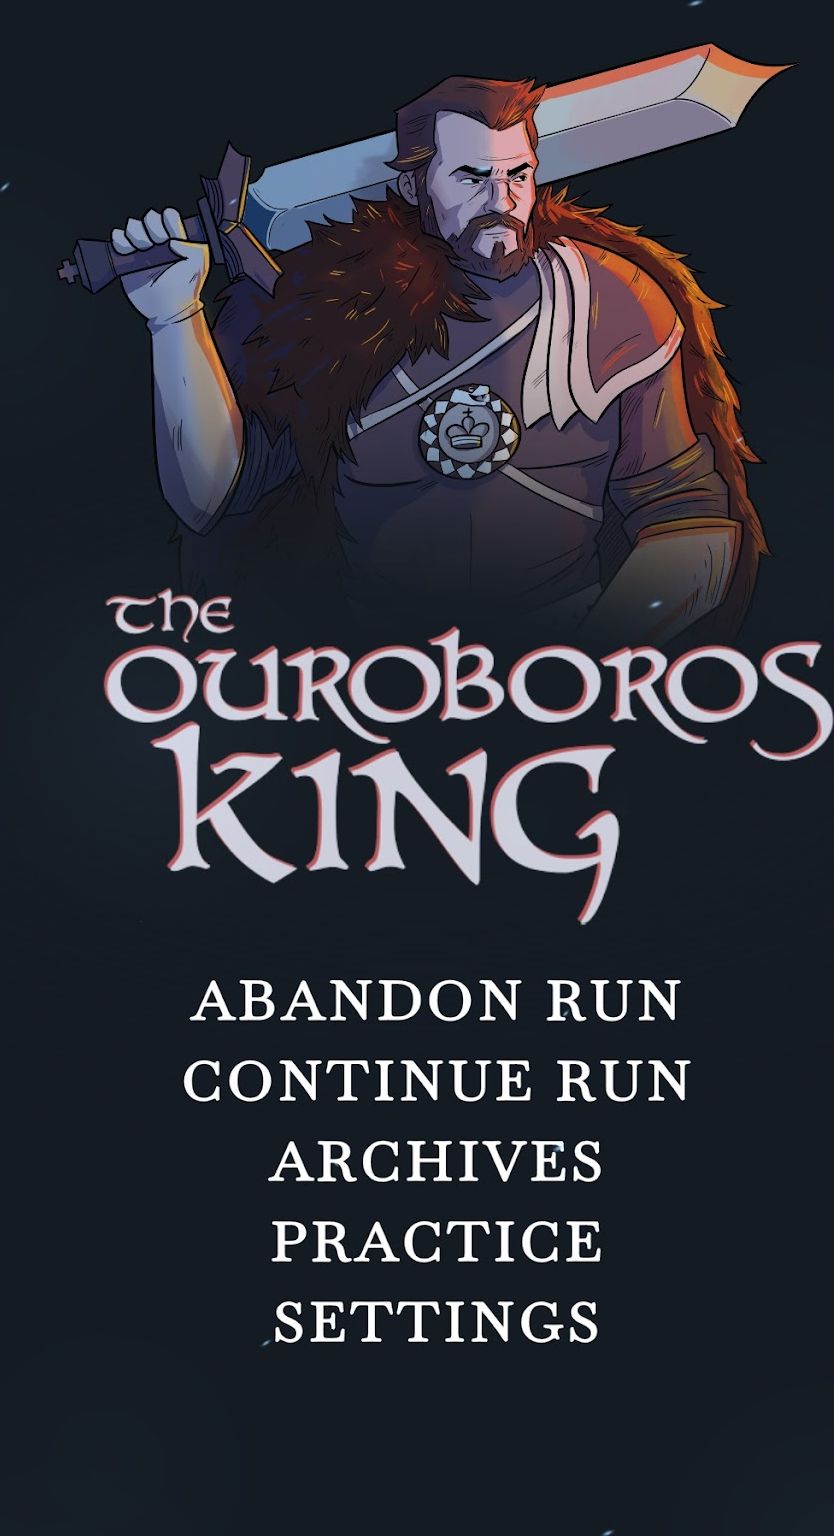 Download Ouroboros King Chess Roguelike für Android kostenlos.